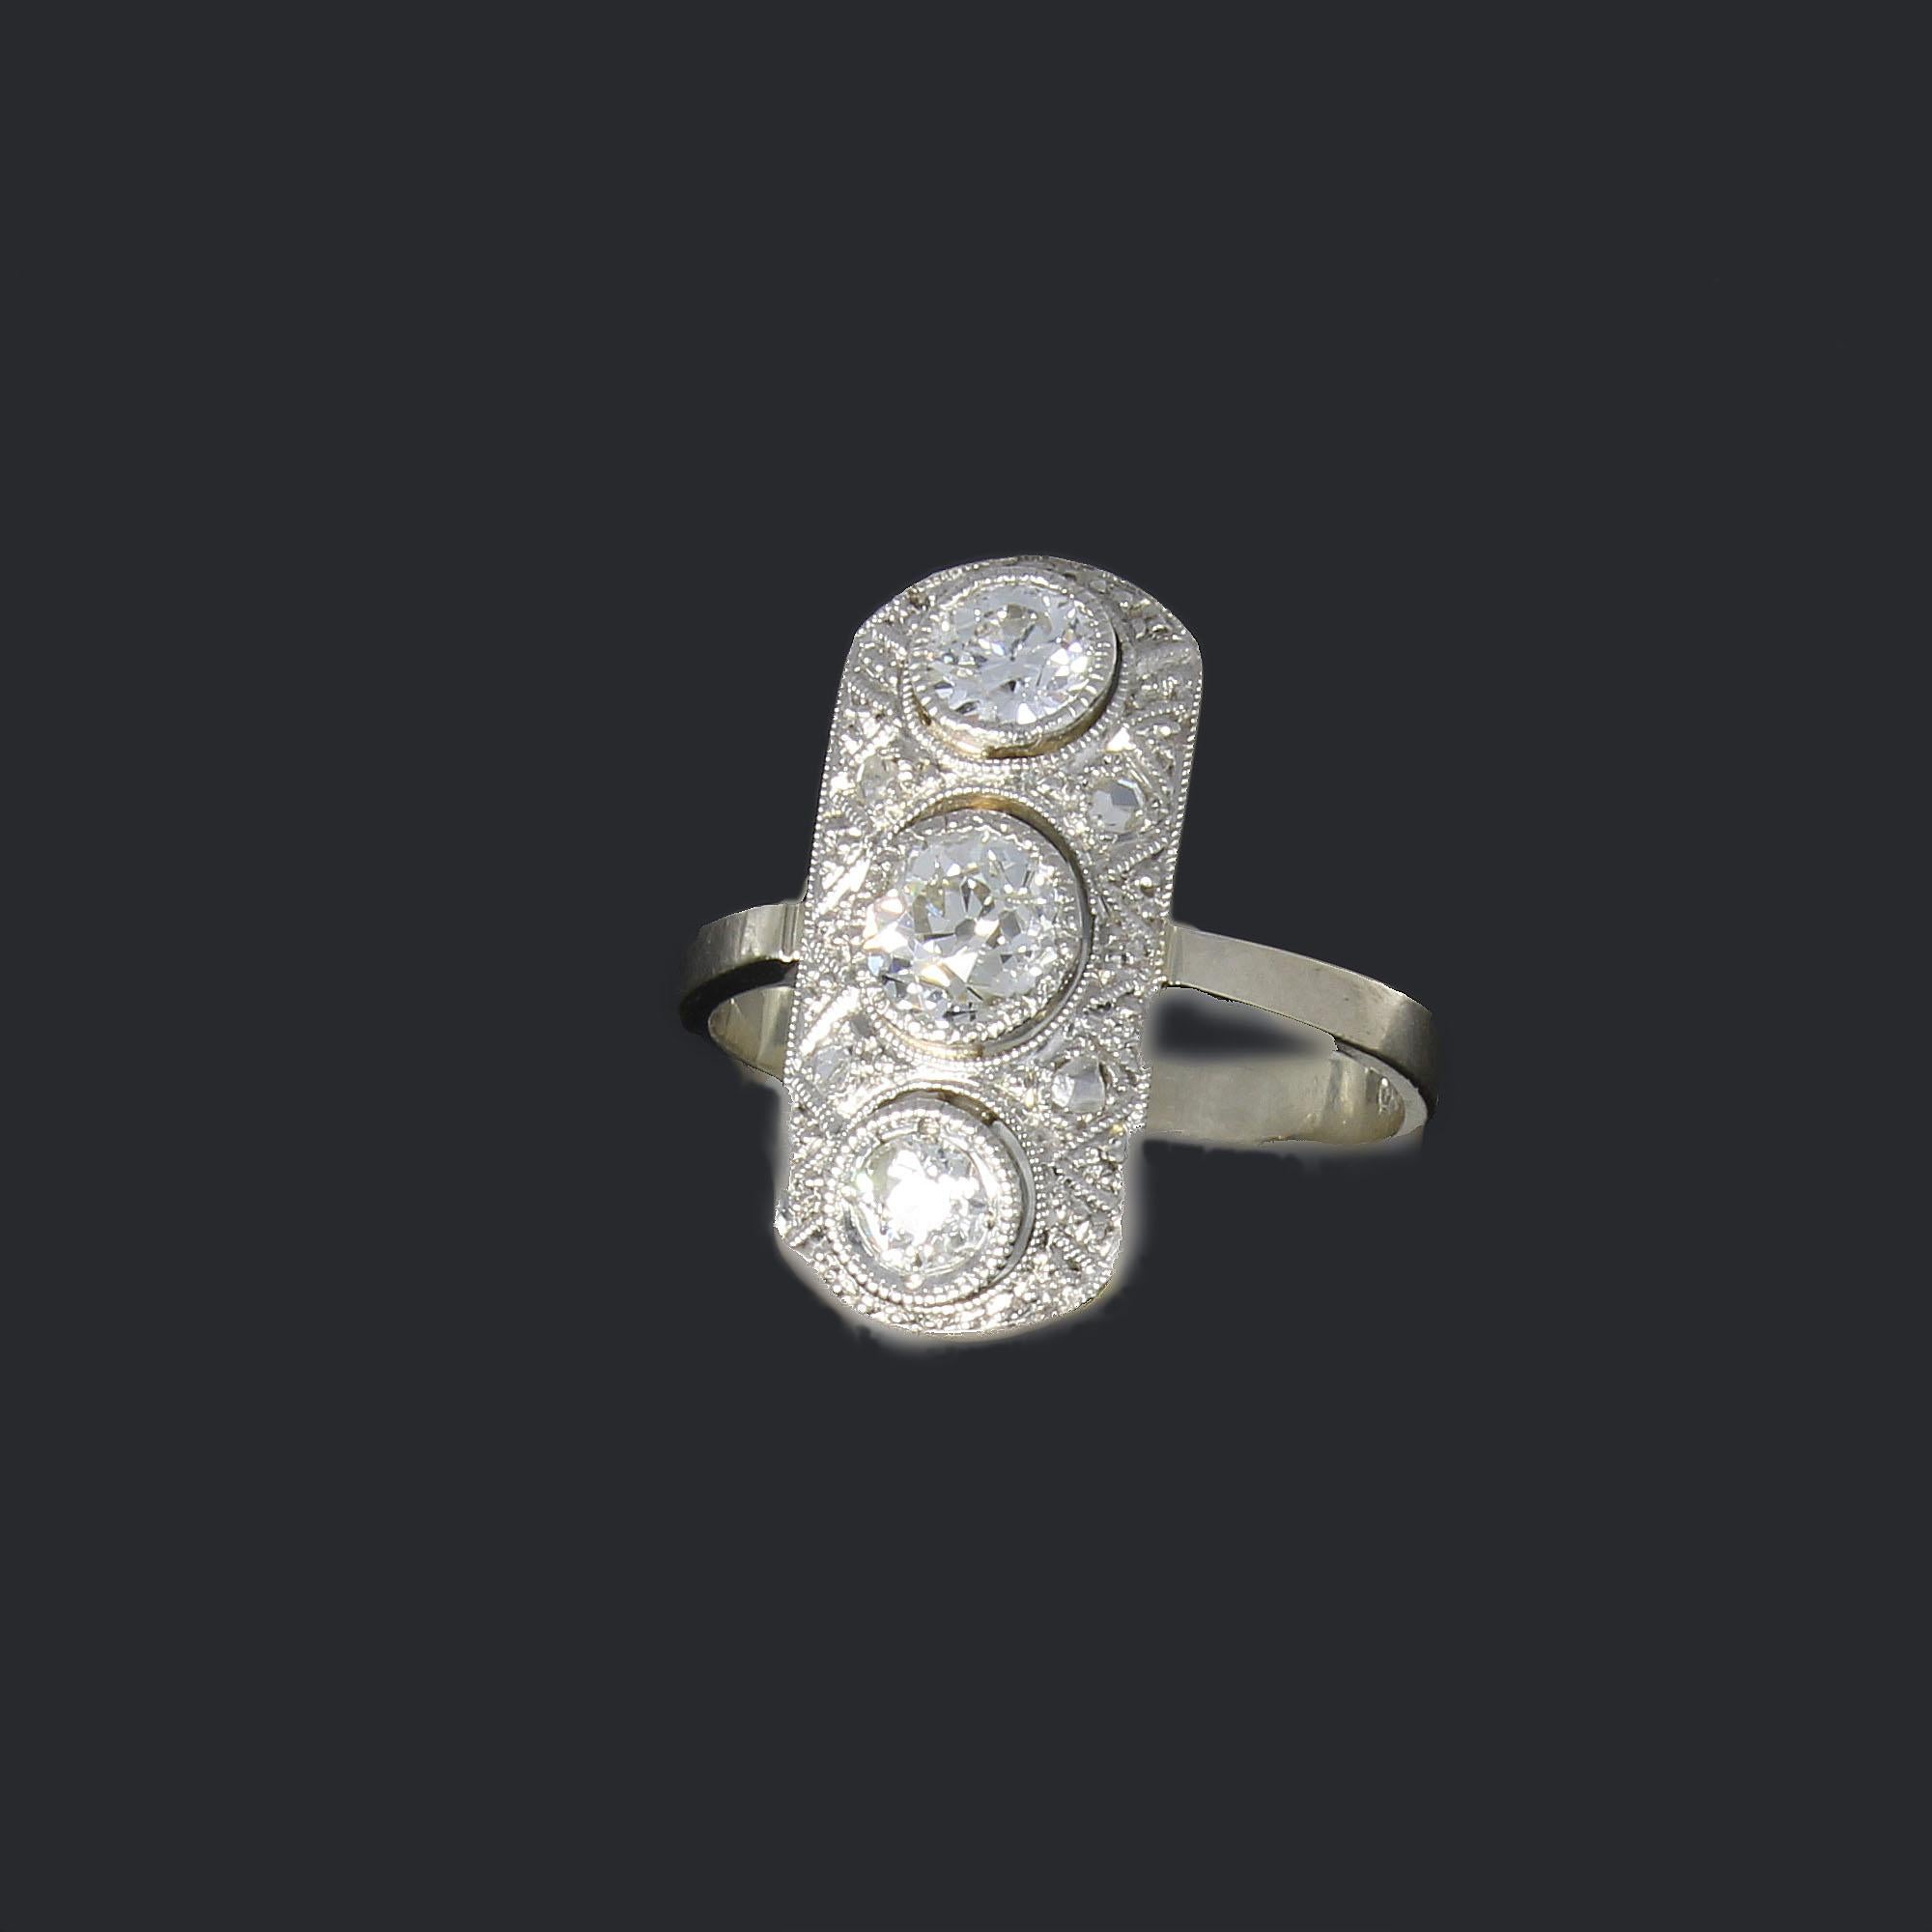 Typically Art Déco style with 7 diamonds. Center stone brilliant-cut diamond weighing ca. 0,52 ct., clarity: S1, color: TW. Two brilliant-cut diamonds weighing circa 0,60 ct, and 4 diamonds. Mounted in 14K white gold. Millegrain setting. Hallmarked